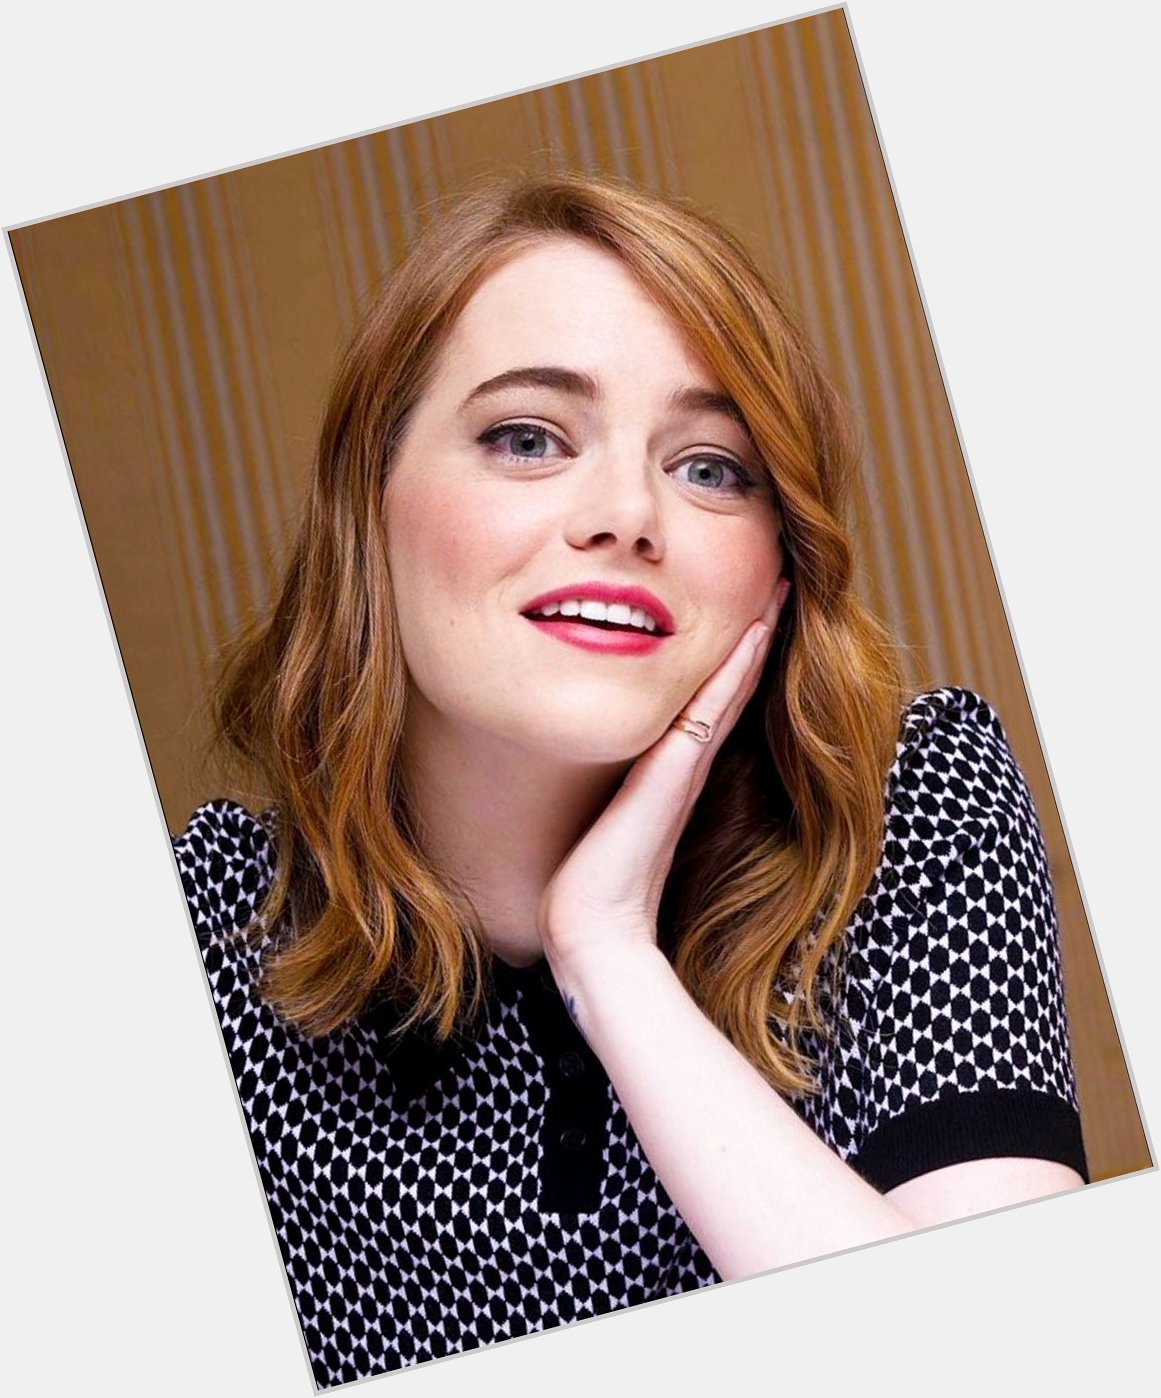 Happy birthday to this cute and talented legend...
Happy birthday Emma Stone  